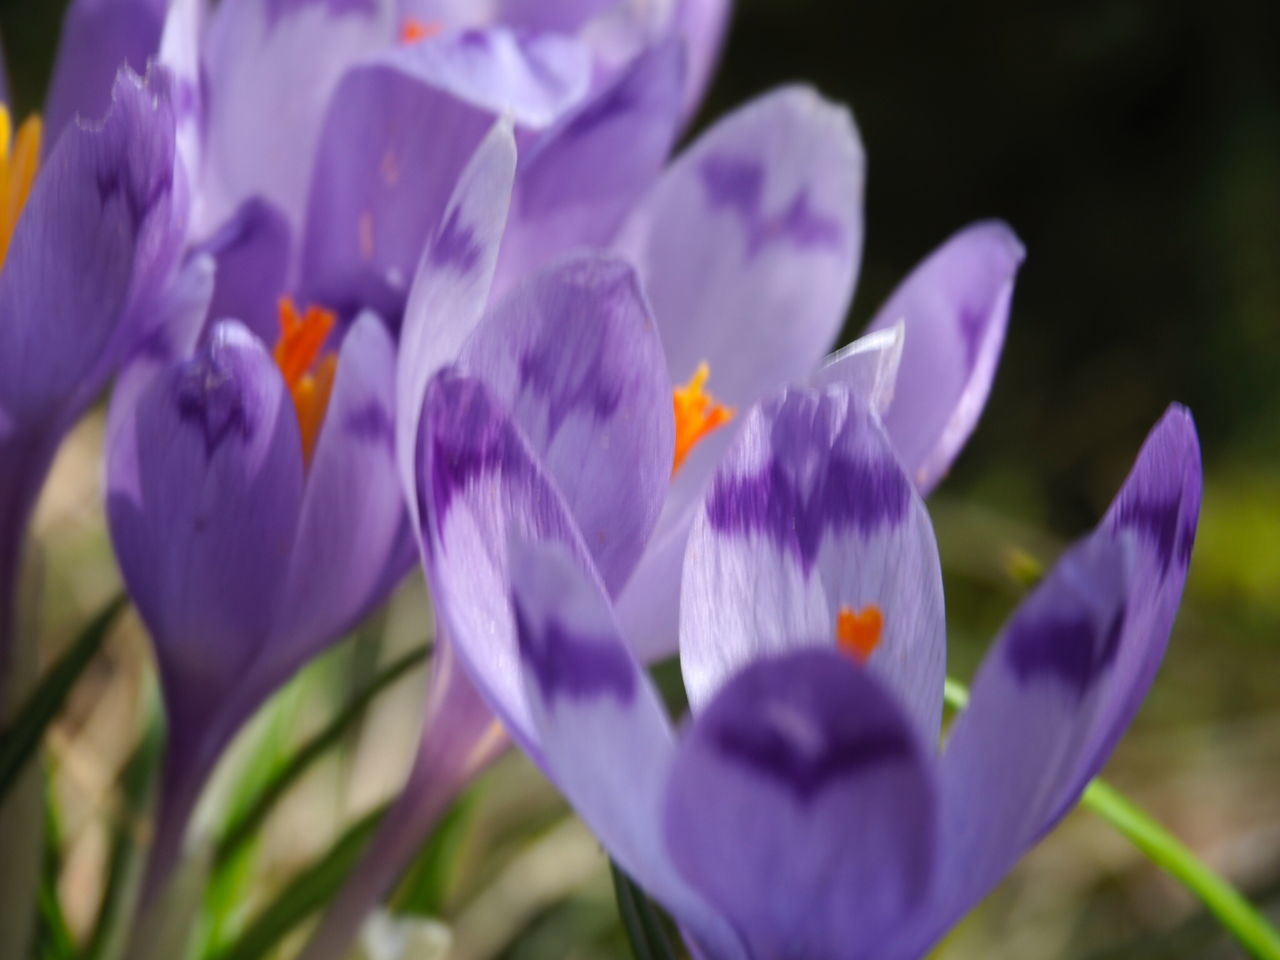 flower, flowering plant, plant, crocus, freshness, beauty in nature, purple, close-up, fragility, petal, growth, nature, iris, flower head, inflorescence, no people, focus on foreground, selective focus, outdoors, blossom, day